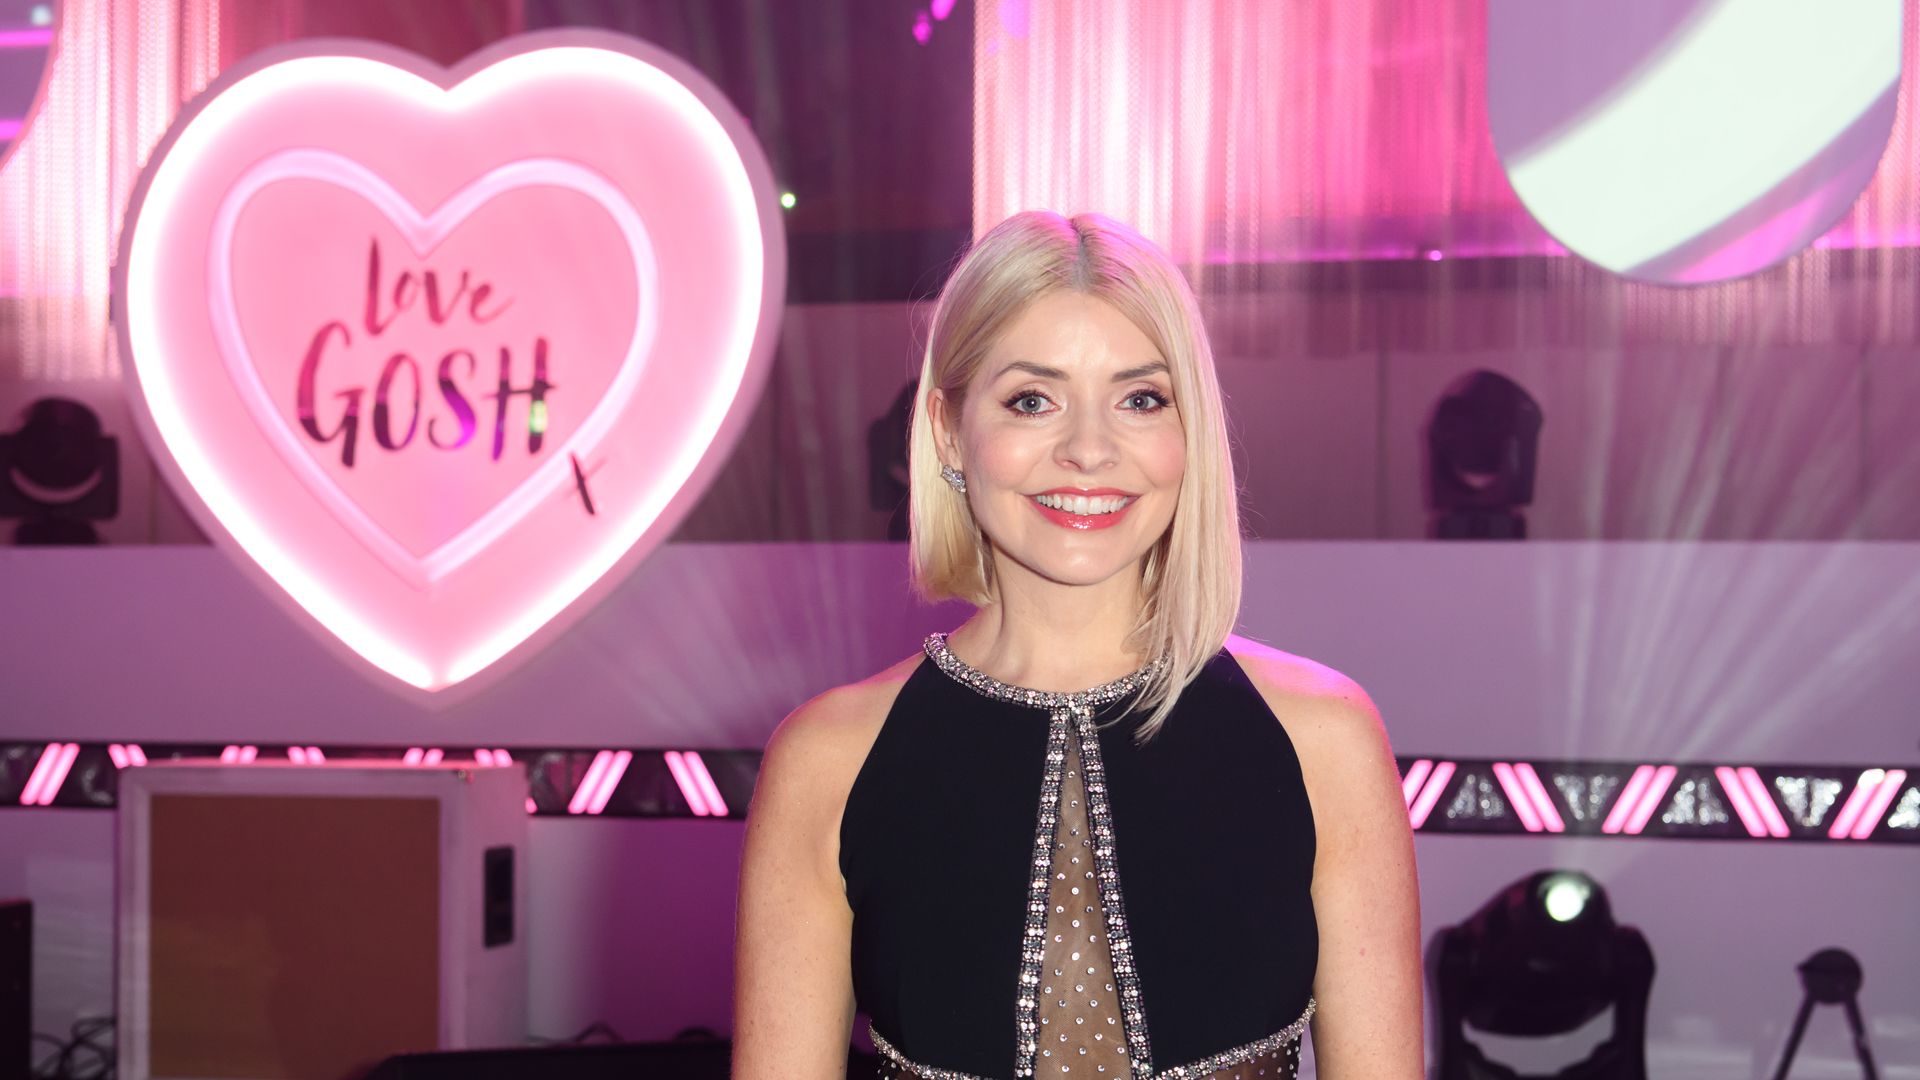 Holly Willoughby smiling in front of a pink heart